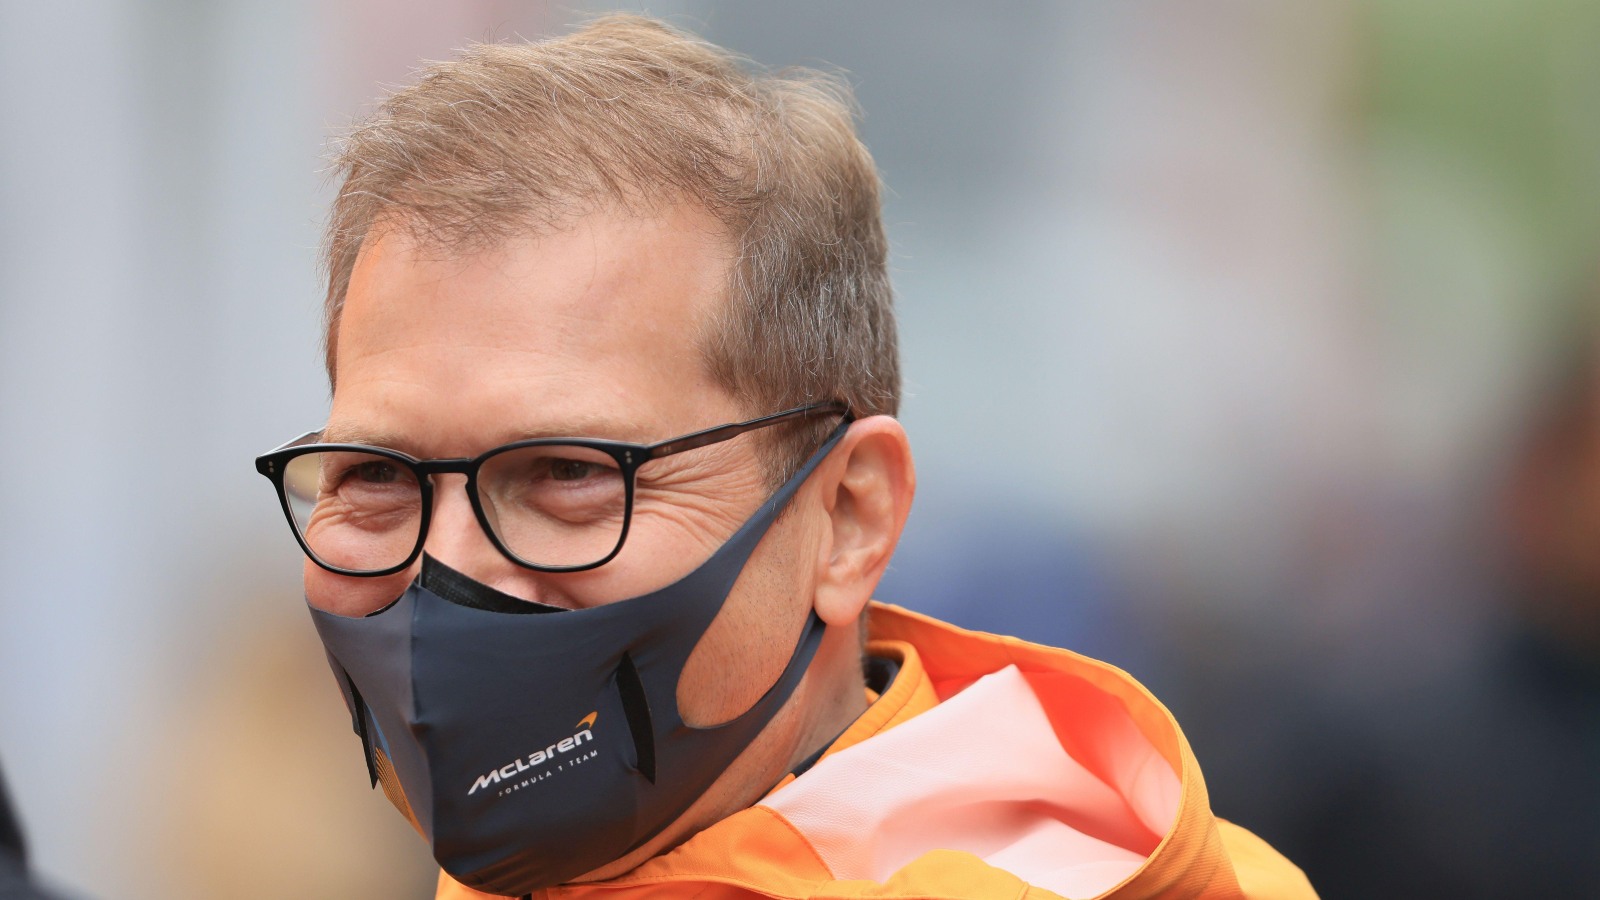 Andreas Seidl smiles whilst wearing a mask. Imola, April 2022.